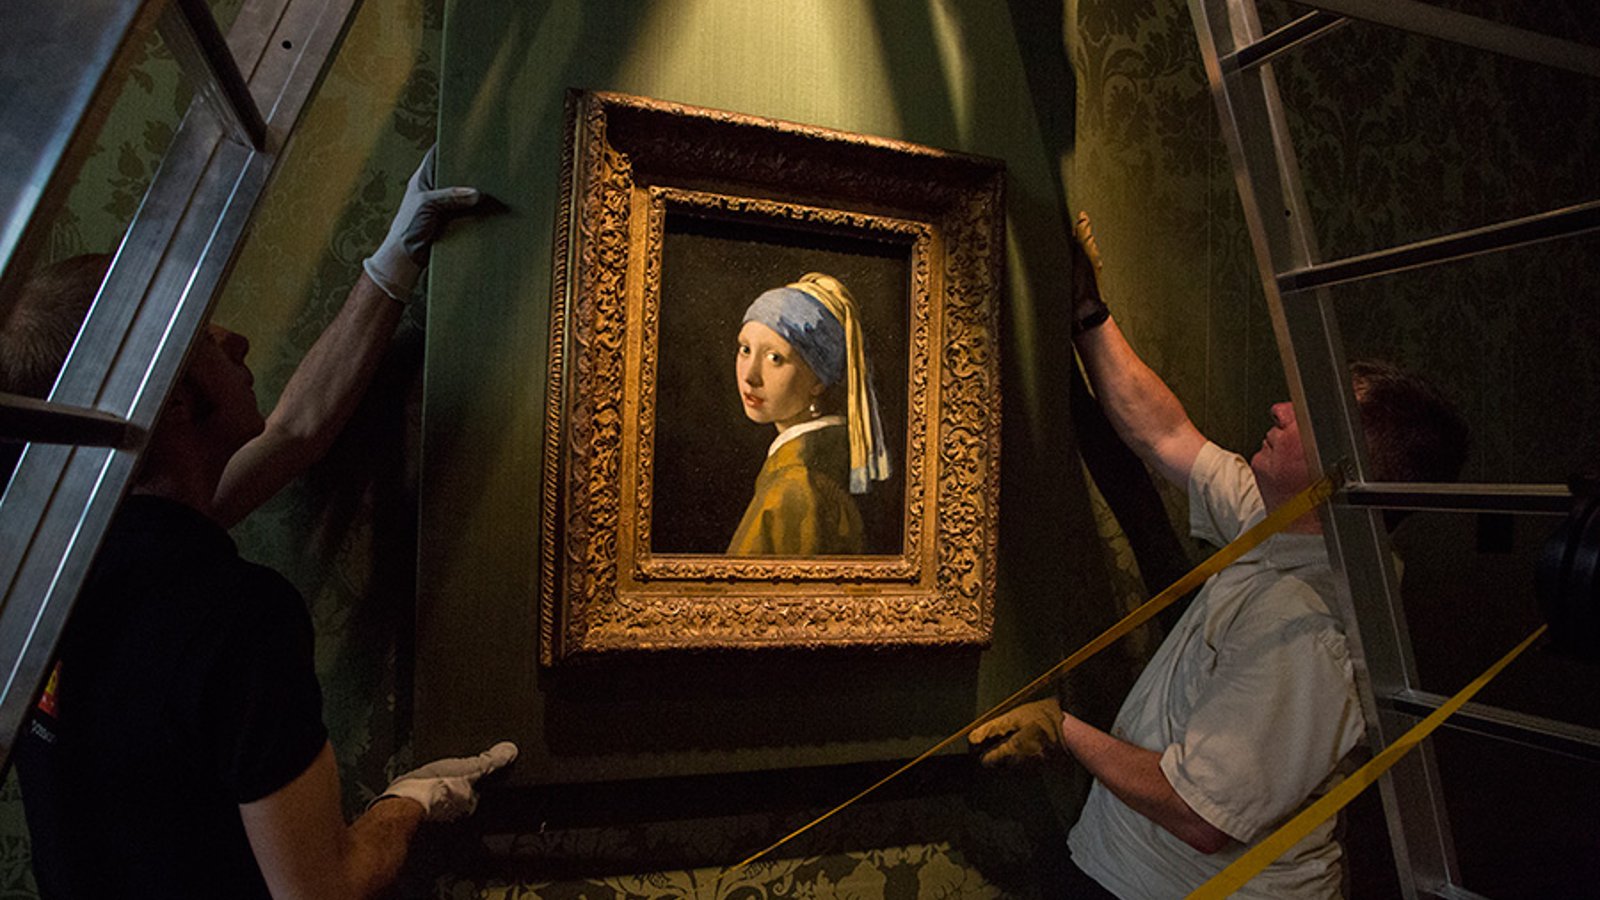 Exhibition on Screen Girl with a Pearl Earring